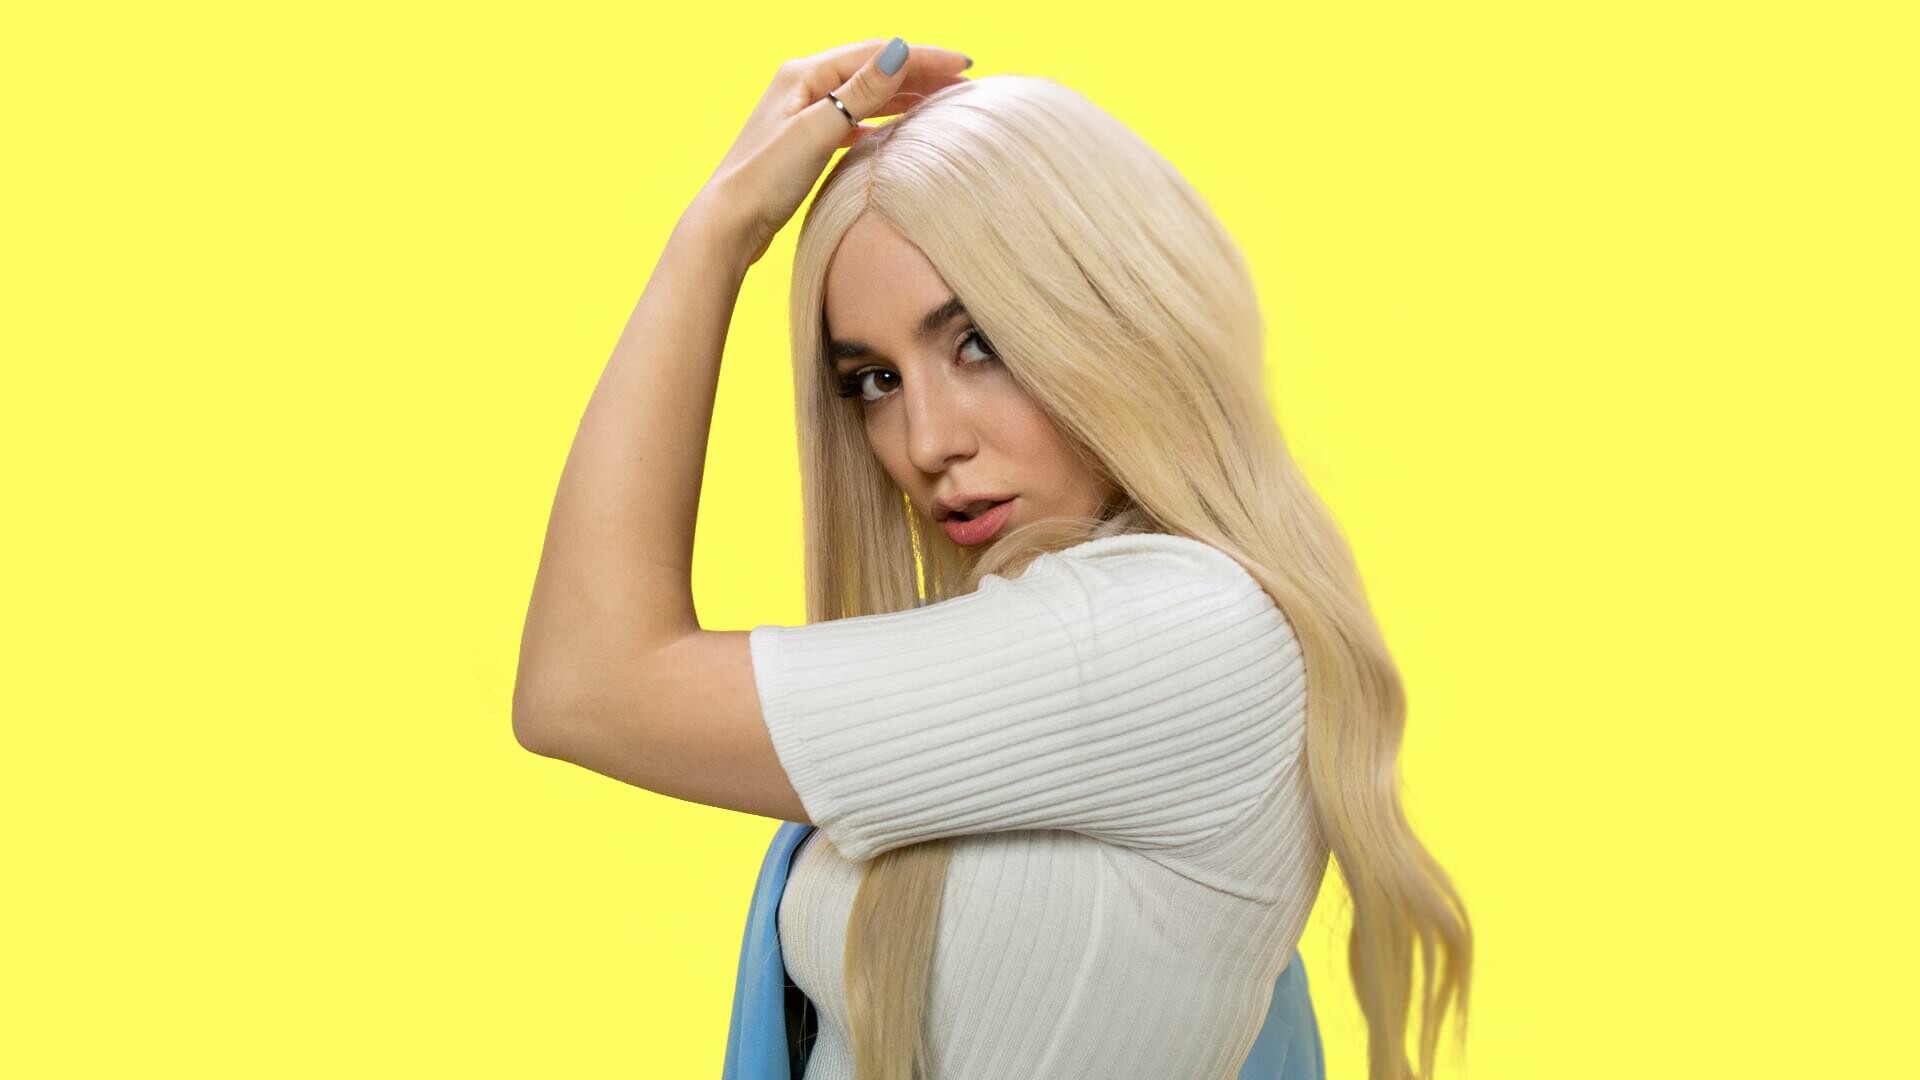 Ava Max: She was featured on the song "Slow Dance" by American singer-songwriter AJ Mitchell. 1920x1080 Full HD Wallpaper.